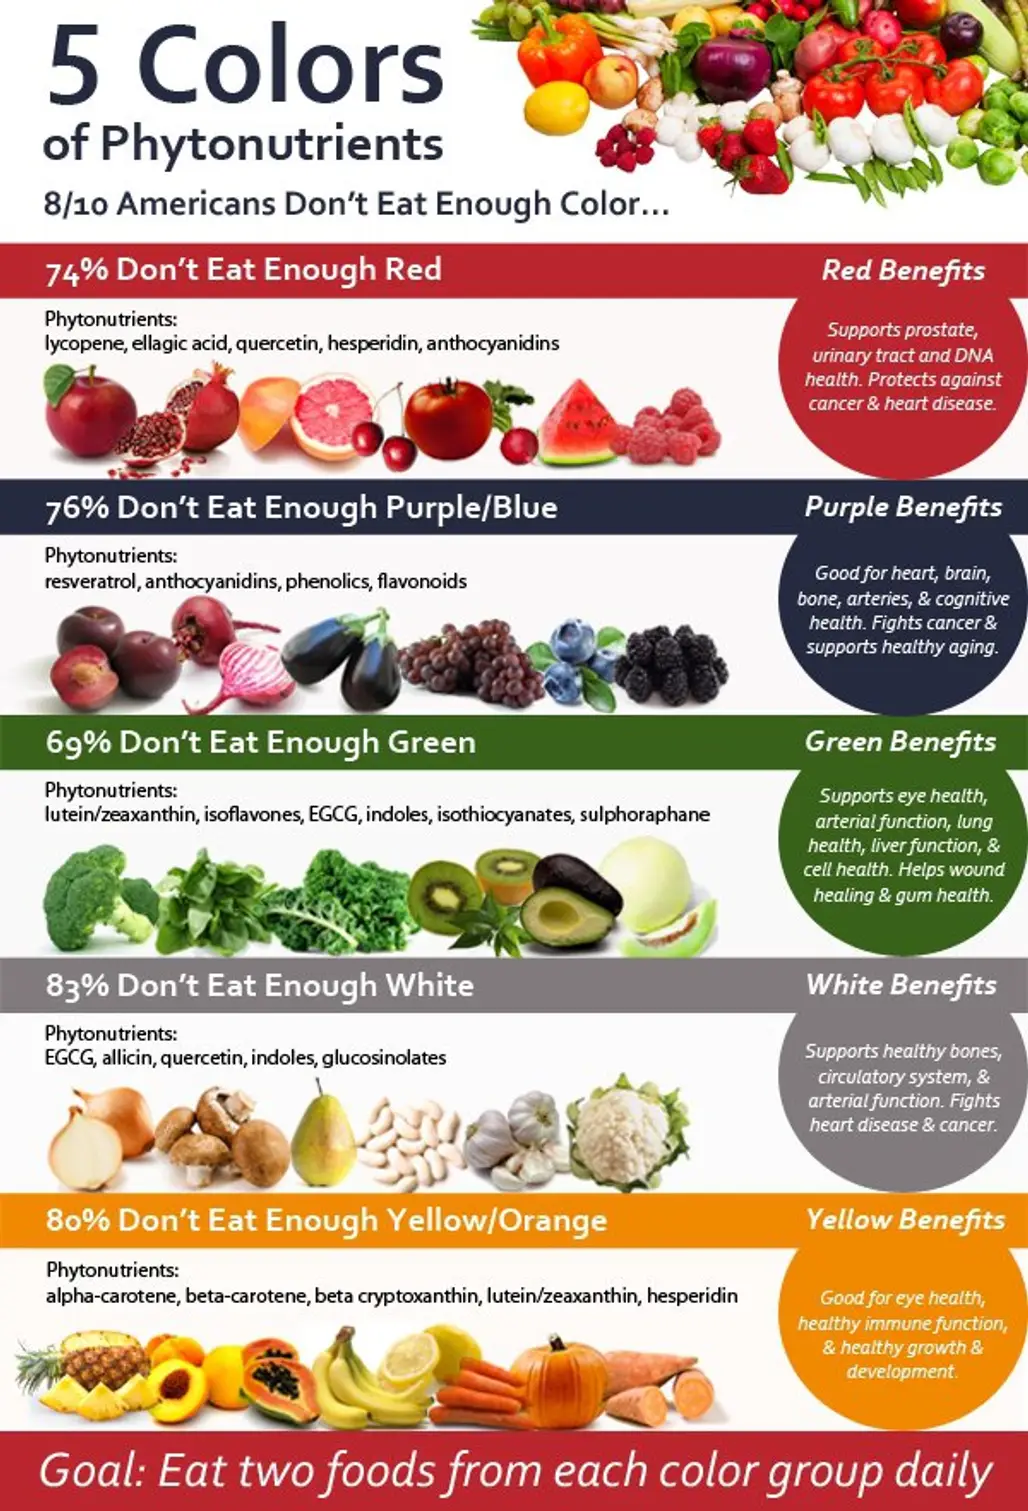 5 Colors of Phytonutrients